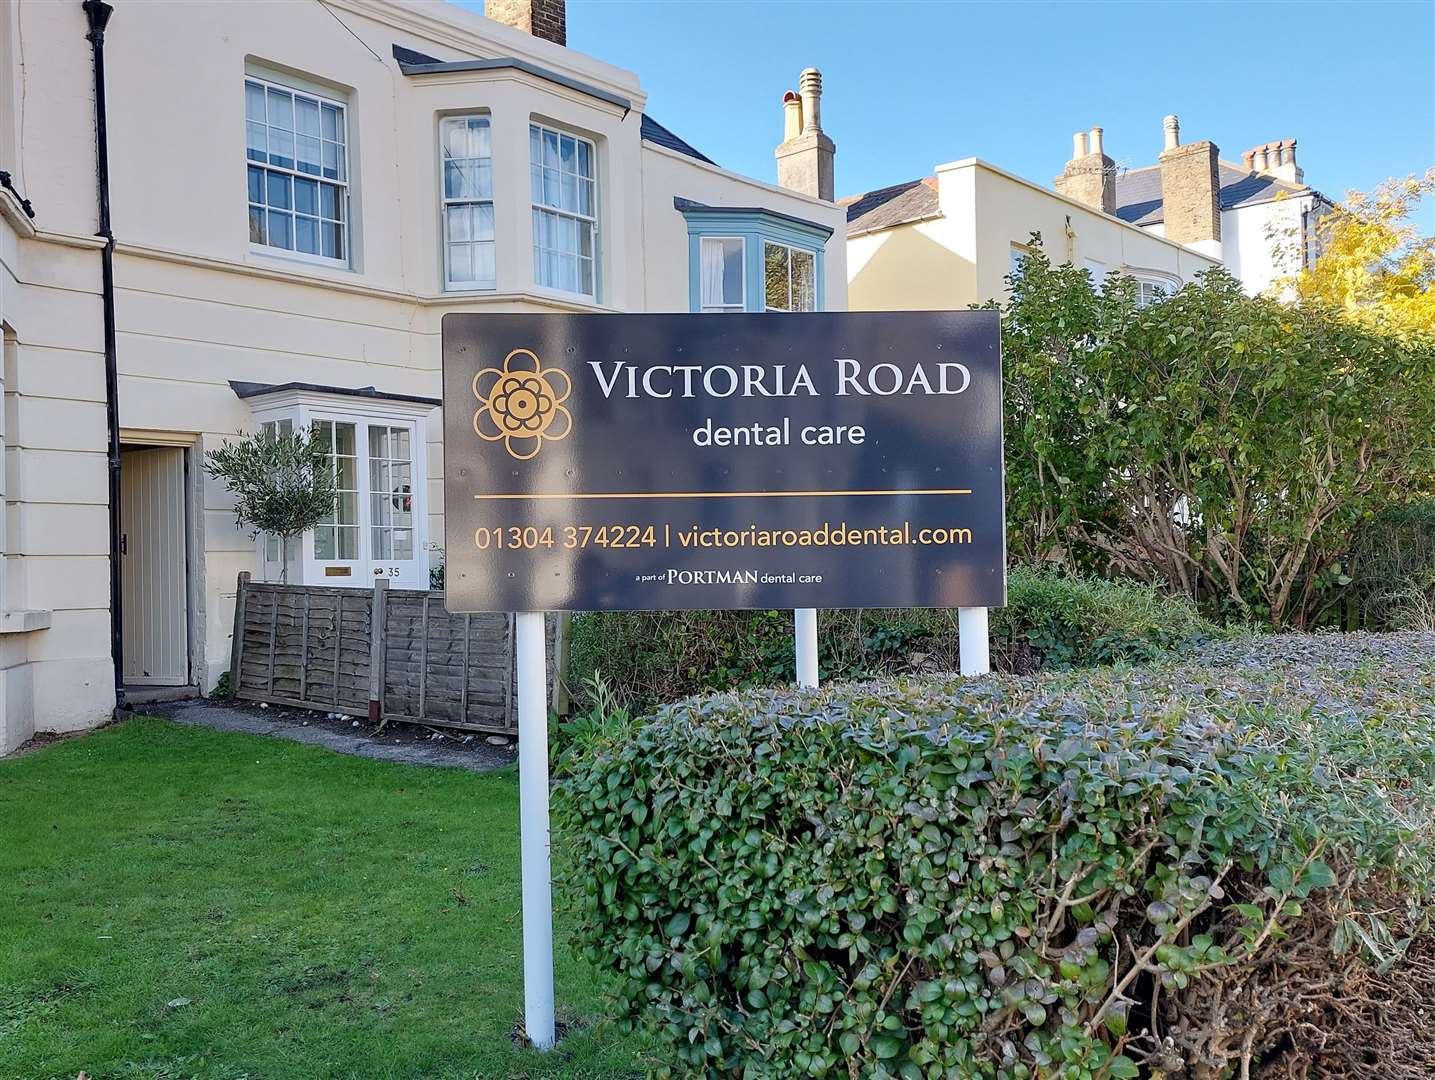 How the new sign looks in Victoria Road